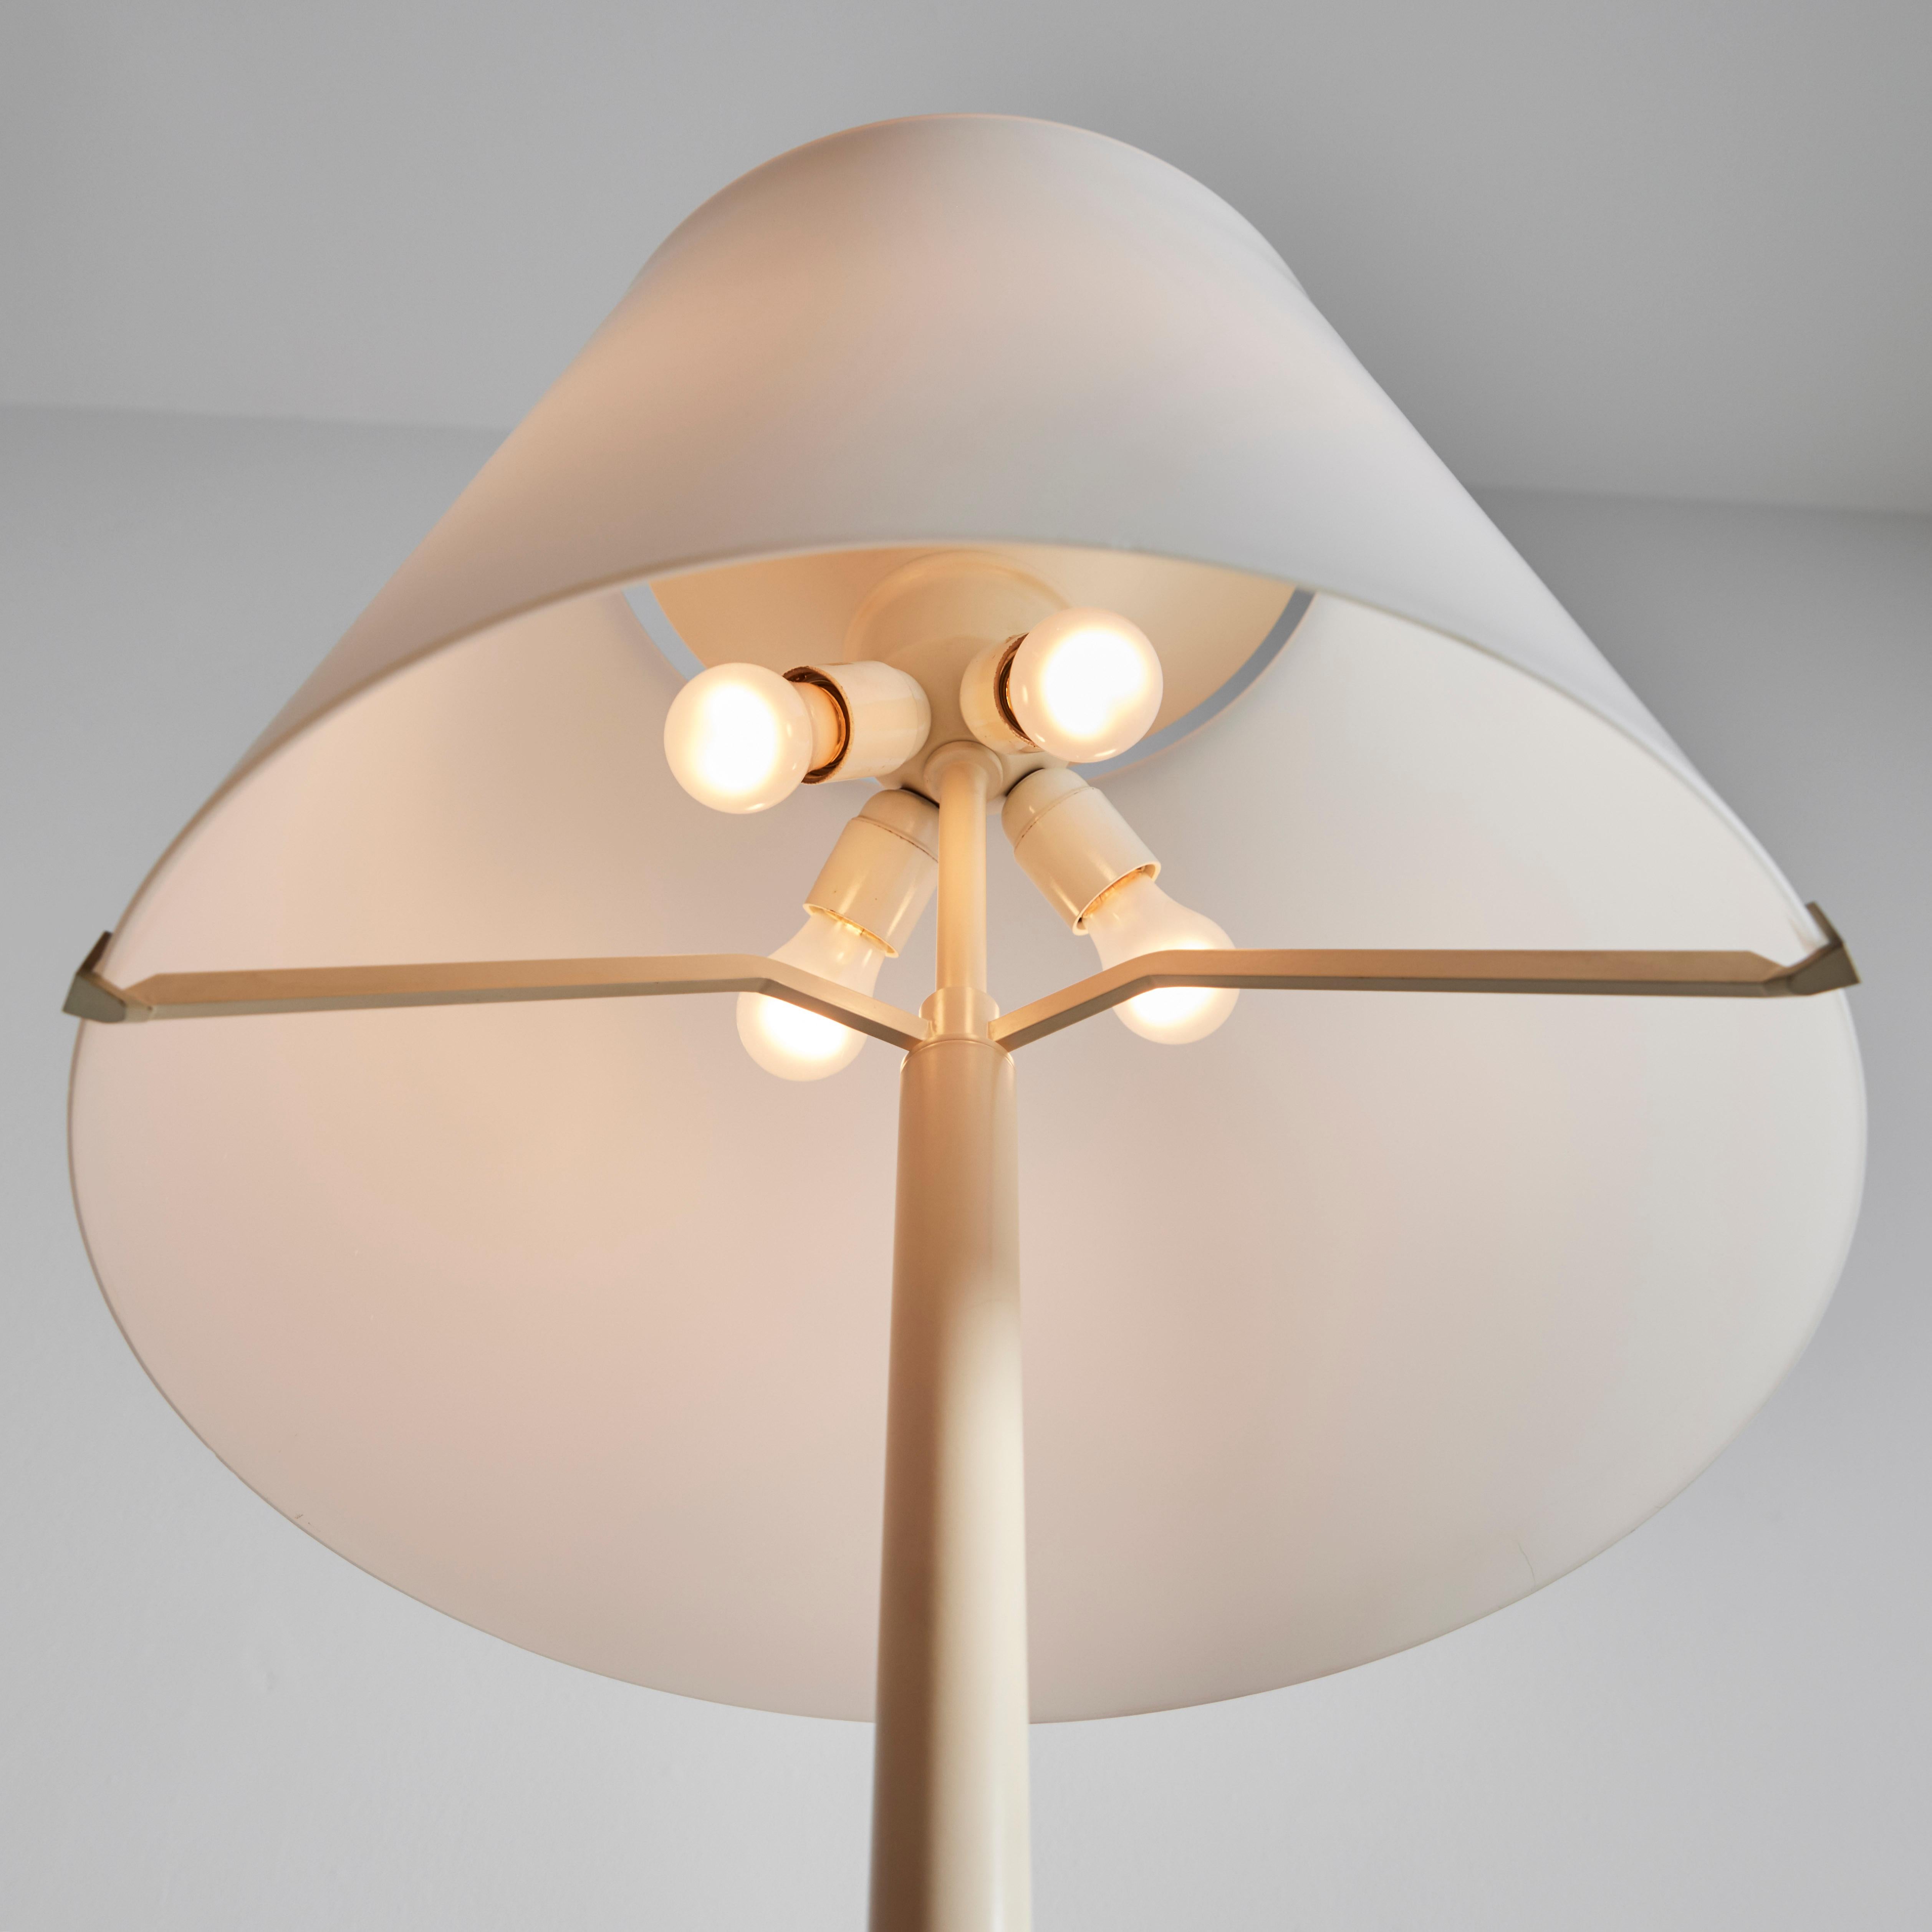 Mid-20th Century Floor Lamp by Max Ingrand for Fontana Arte